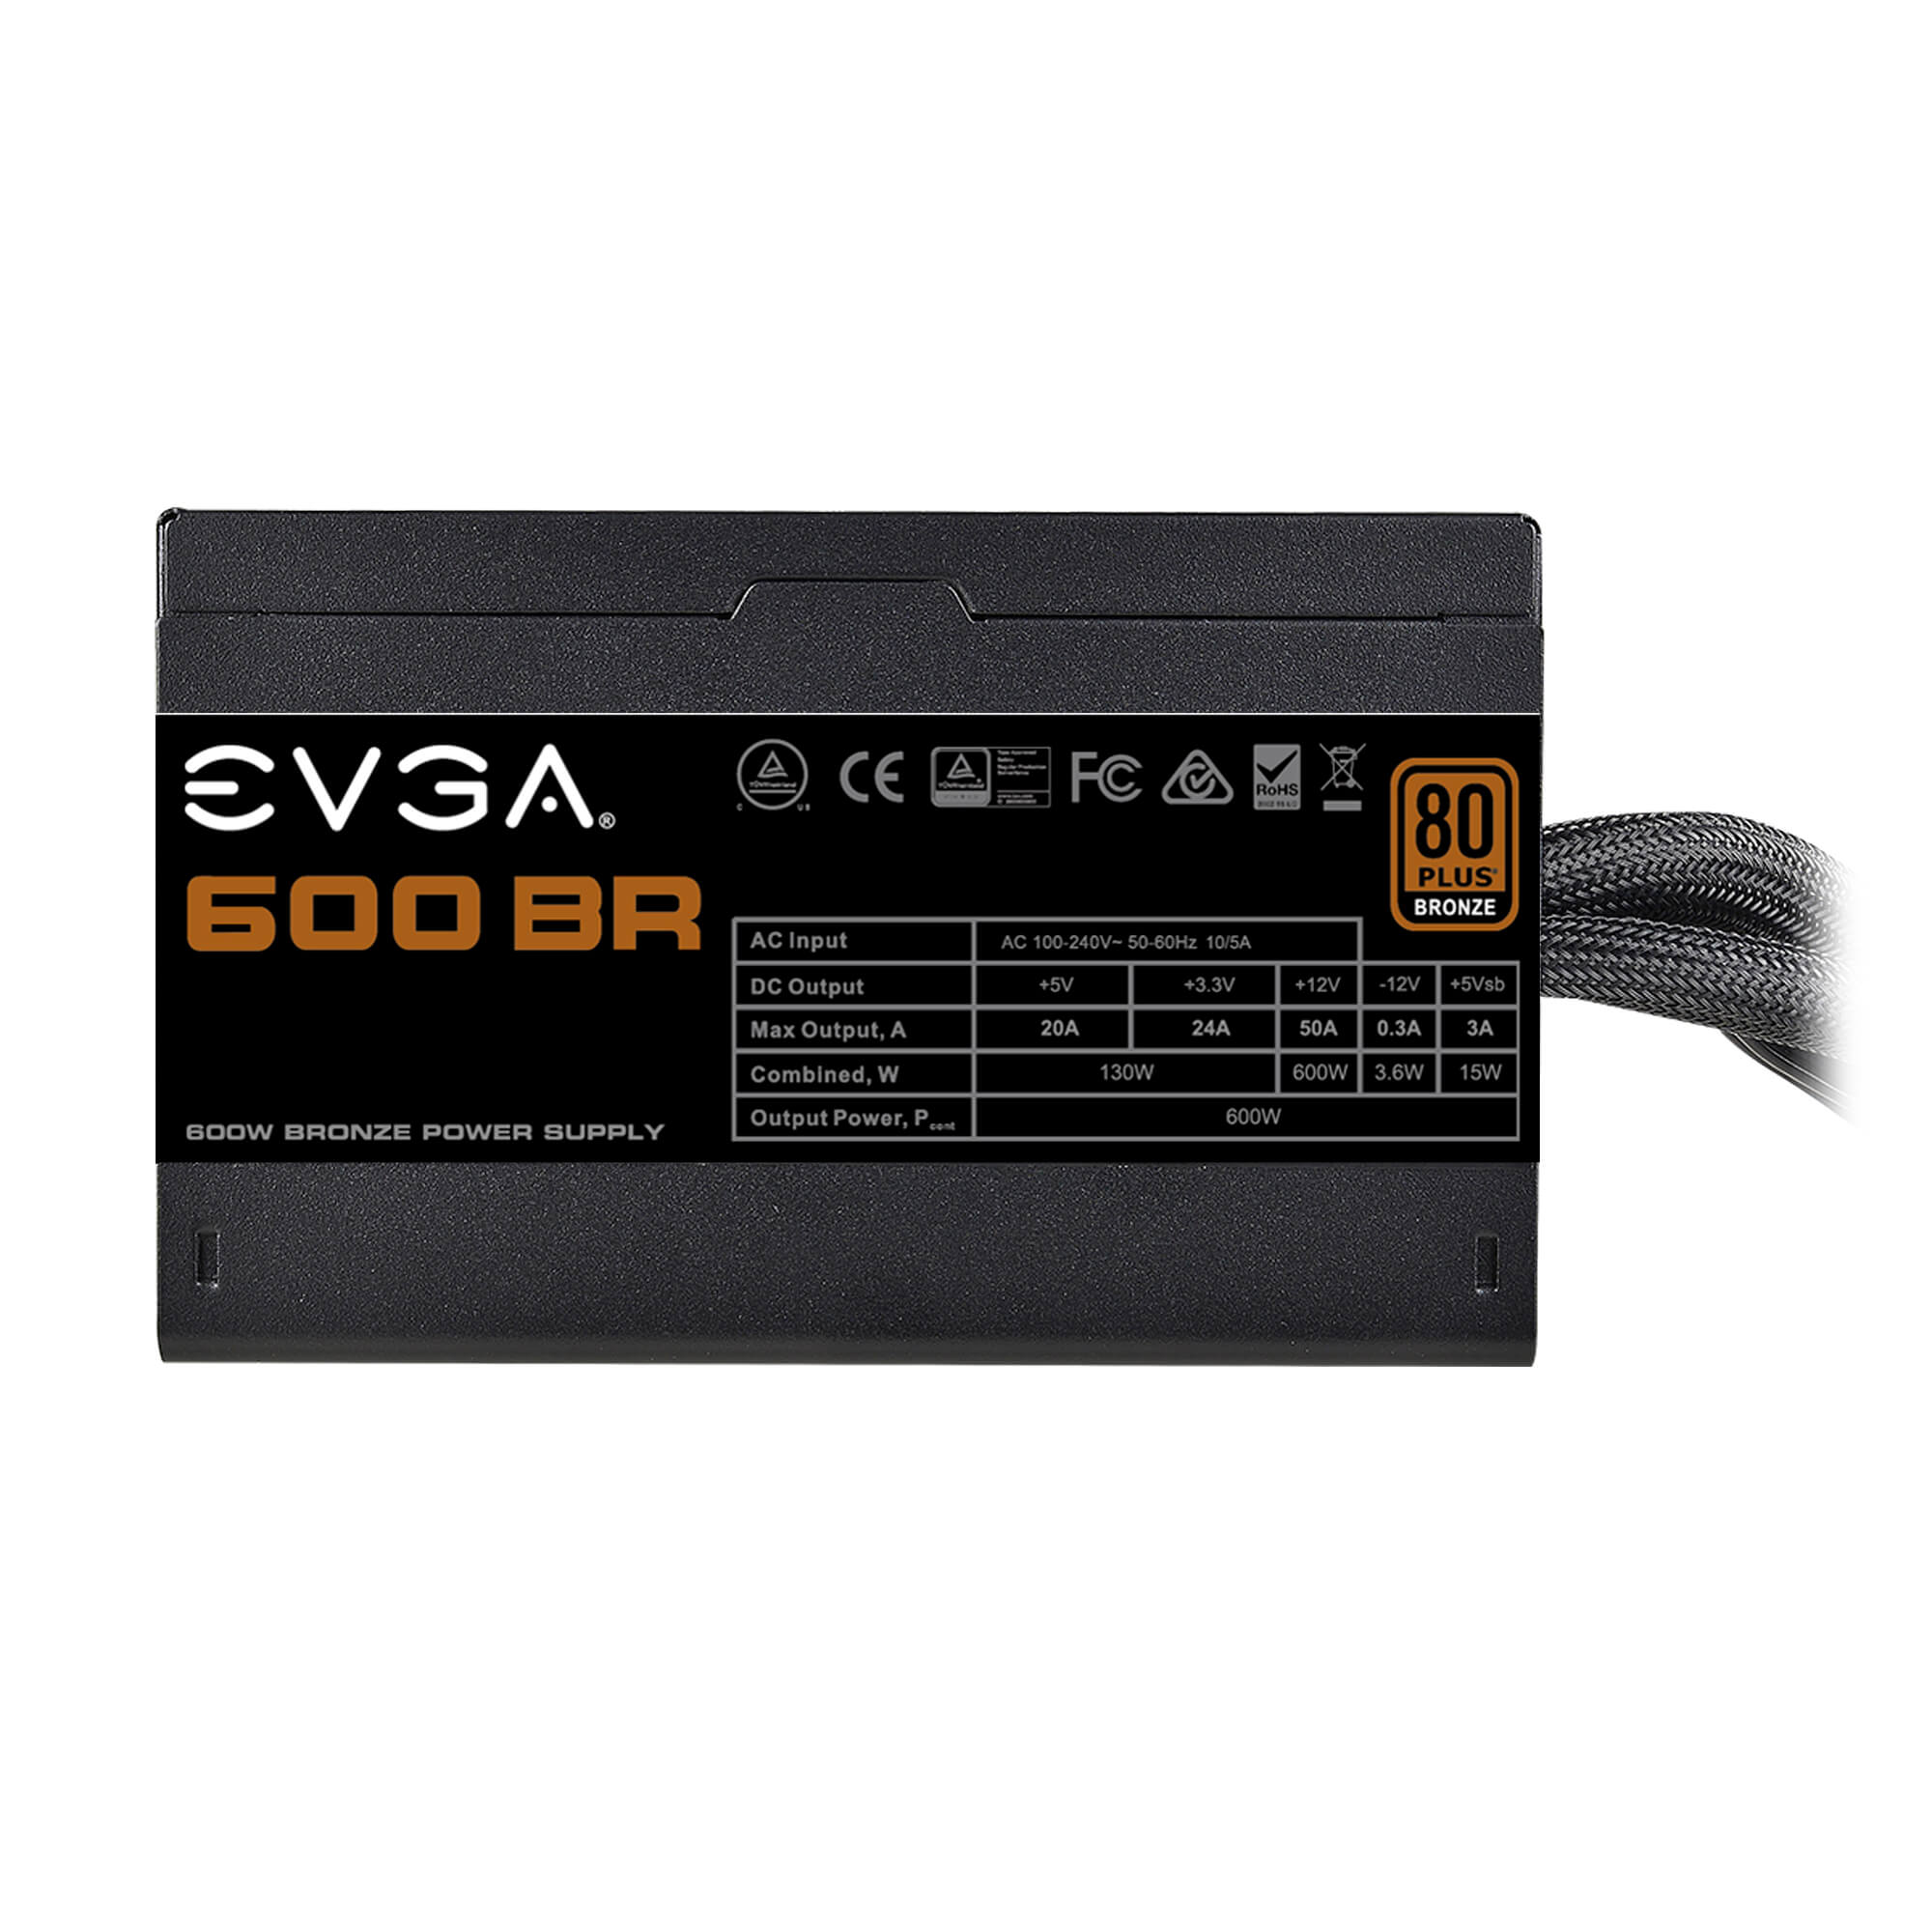 https://images.evga.com/products/gallery/100-BR-0600-K1_XL_6.jpg